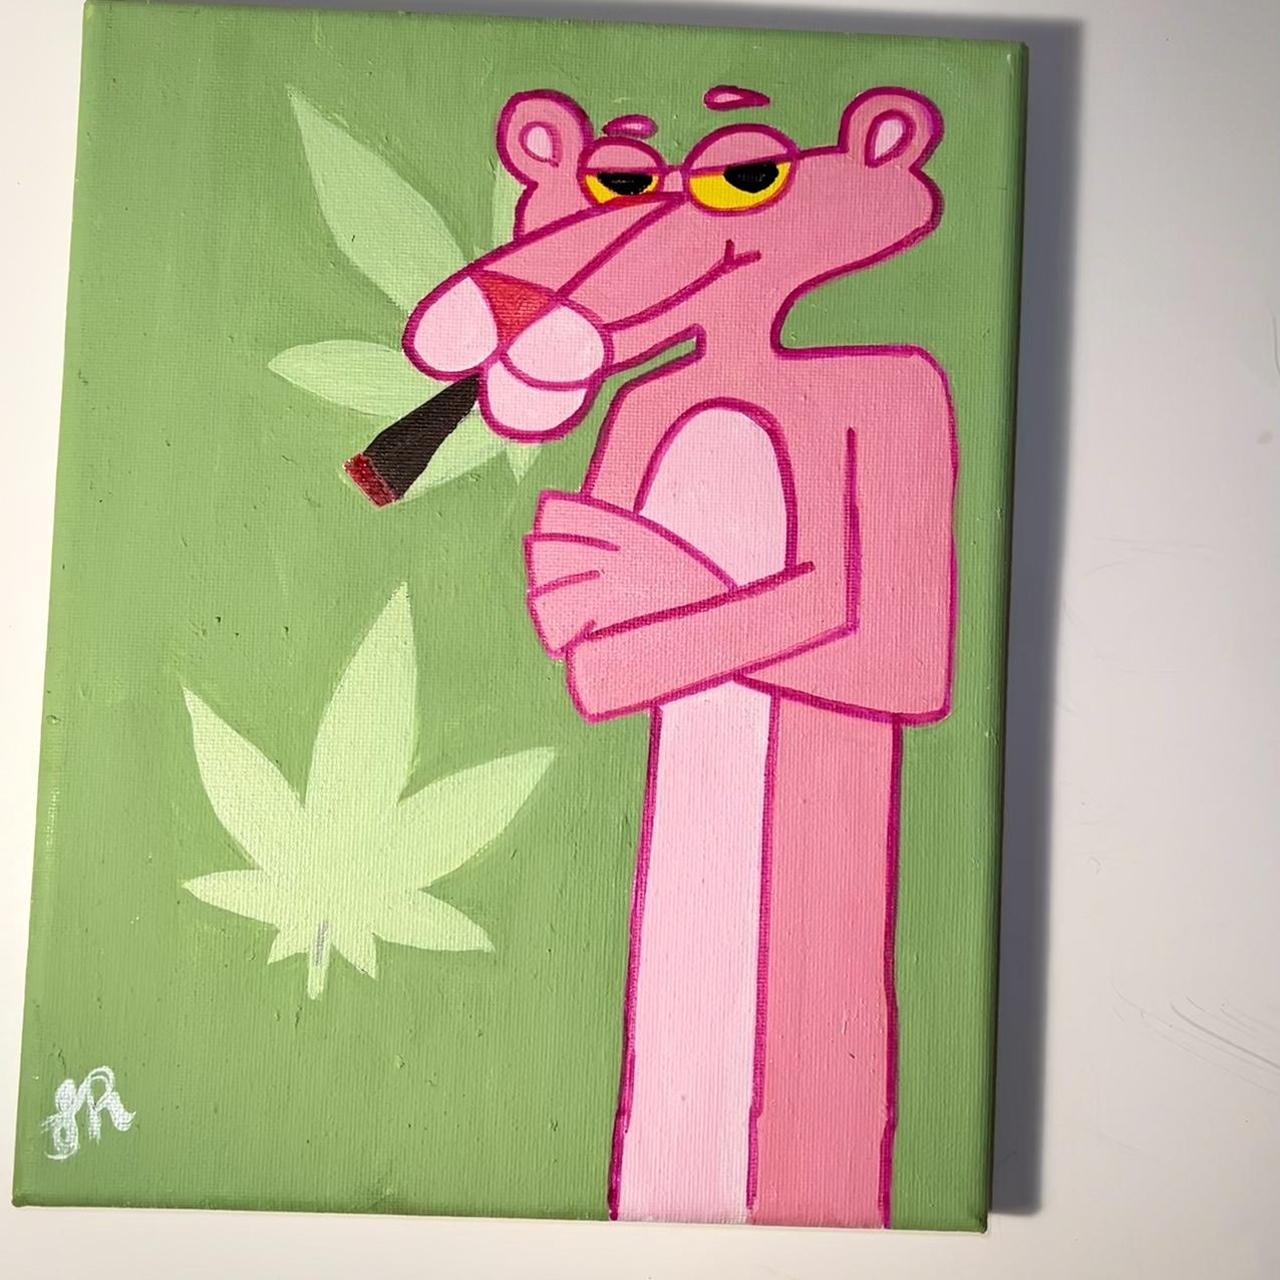 Pink Panther Trippy Psychedelic Pop Art Painting for Sale – Palm Treat